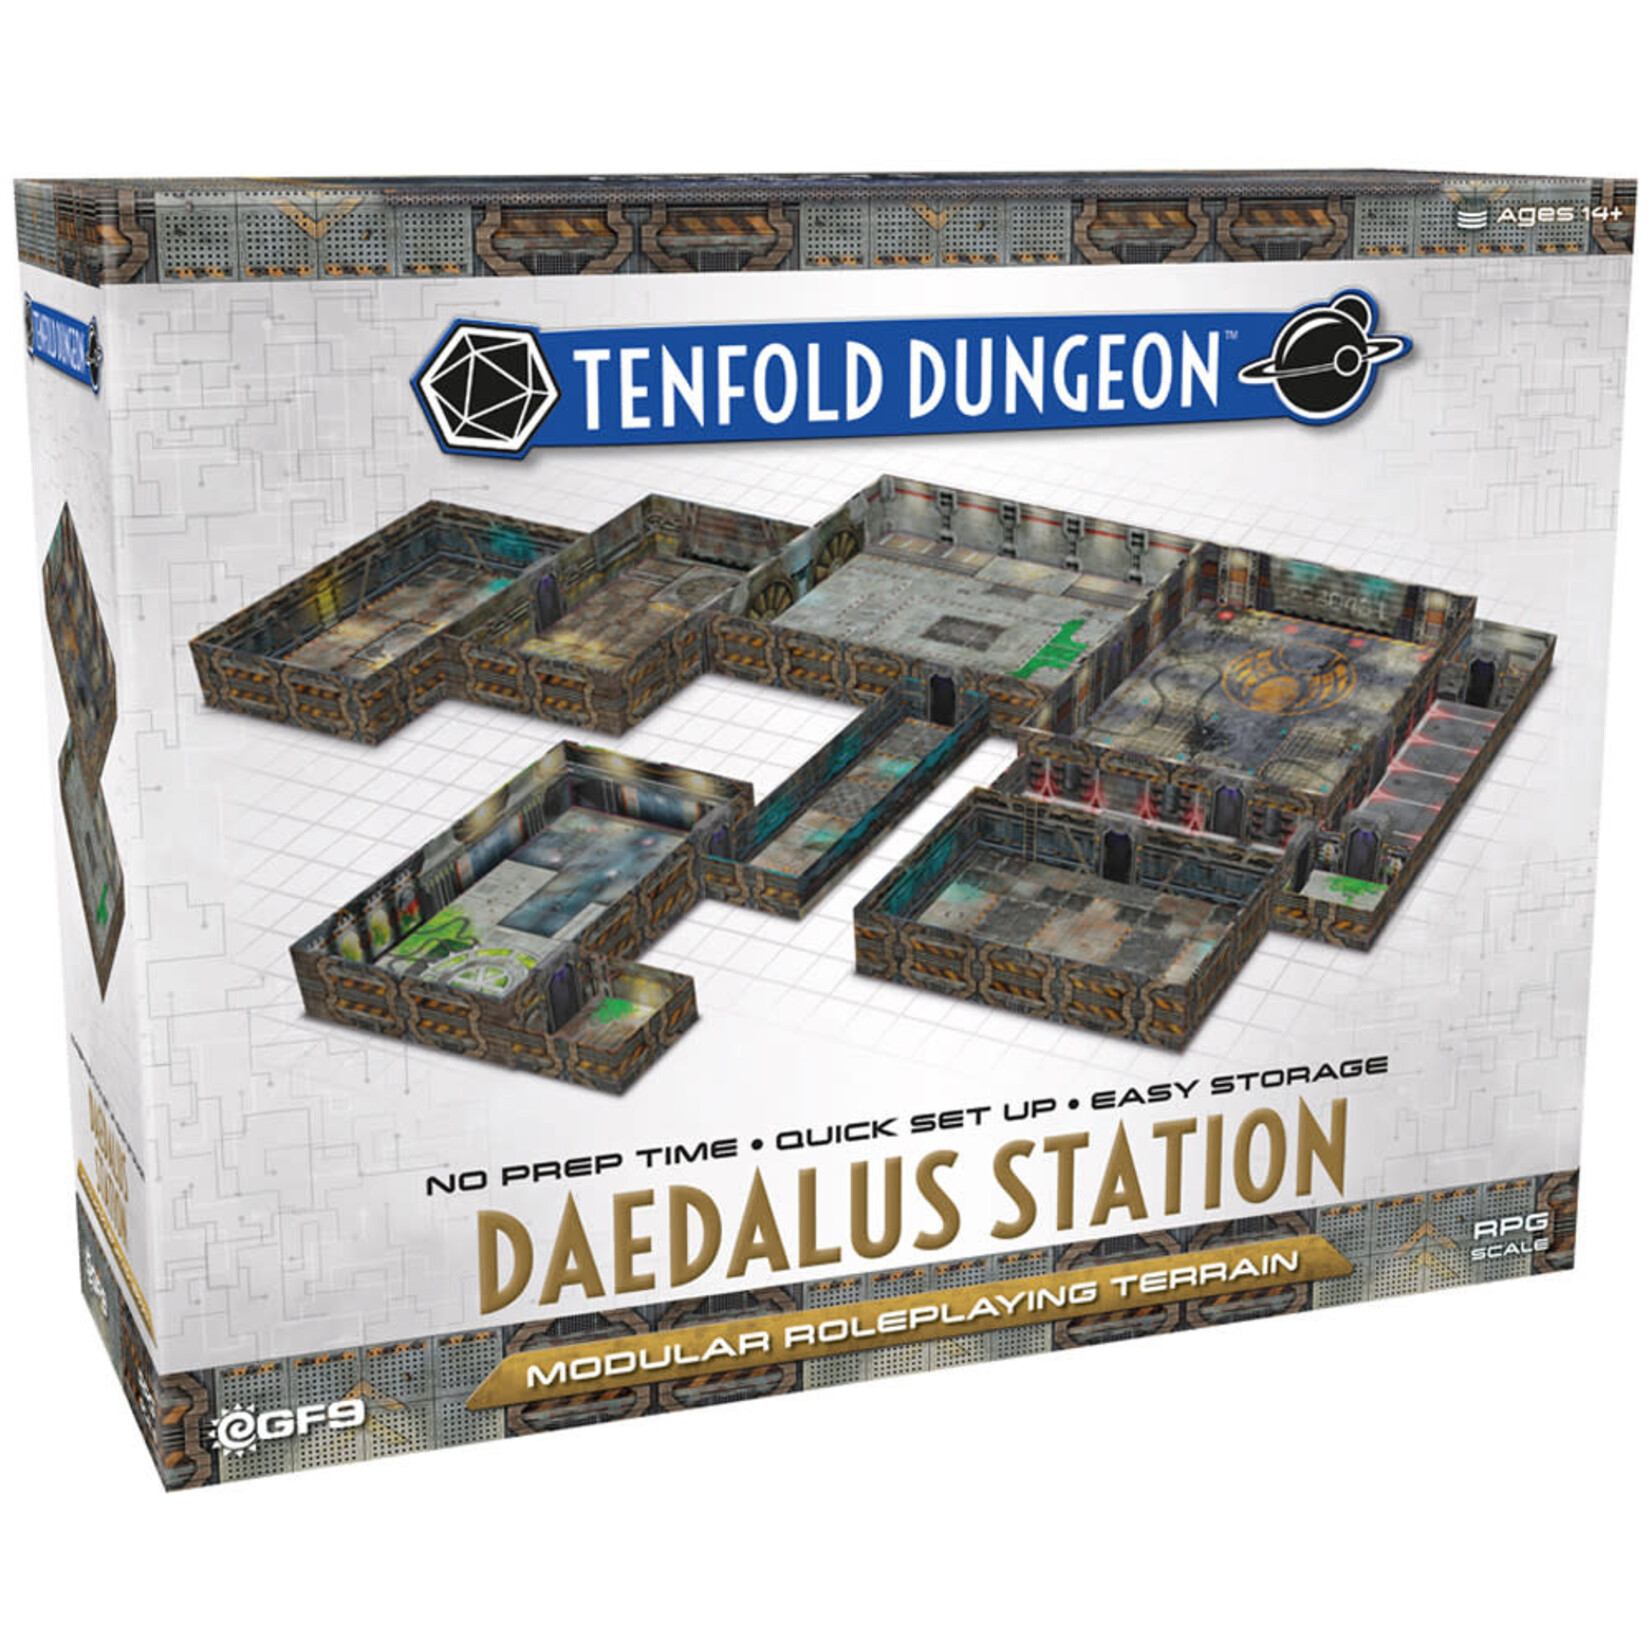 Gale Force 9 Tenfold Dungeon Daedalus Station